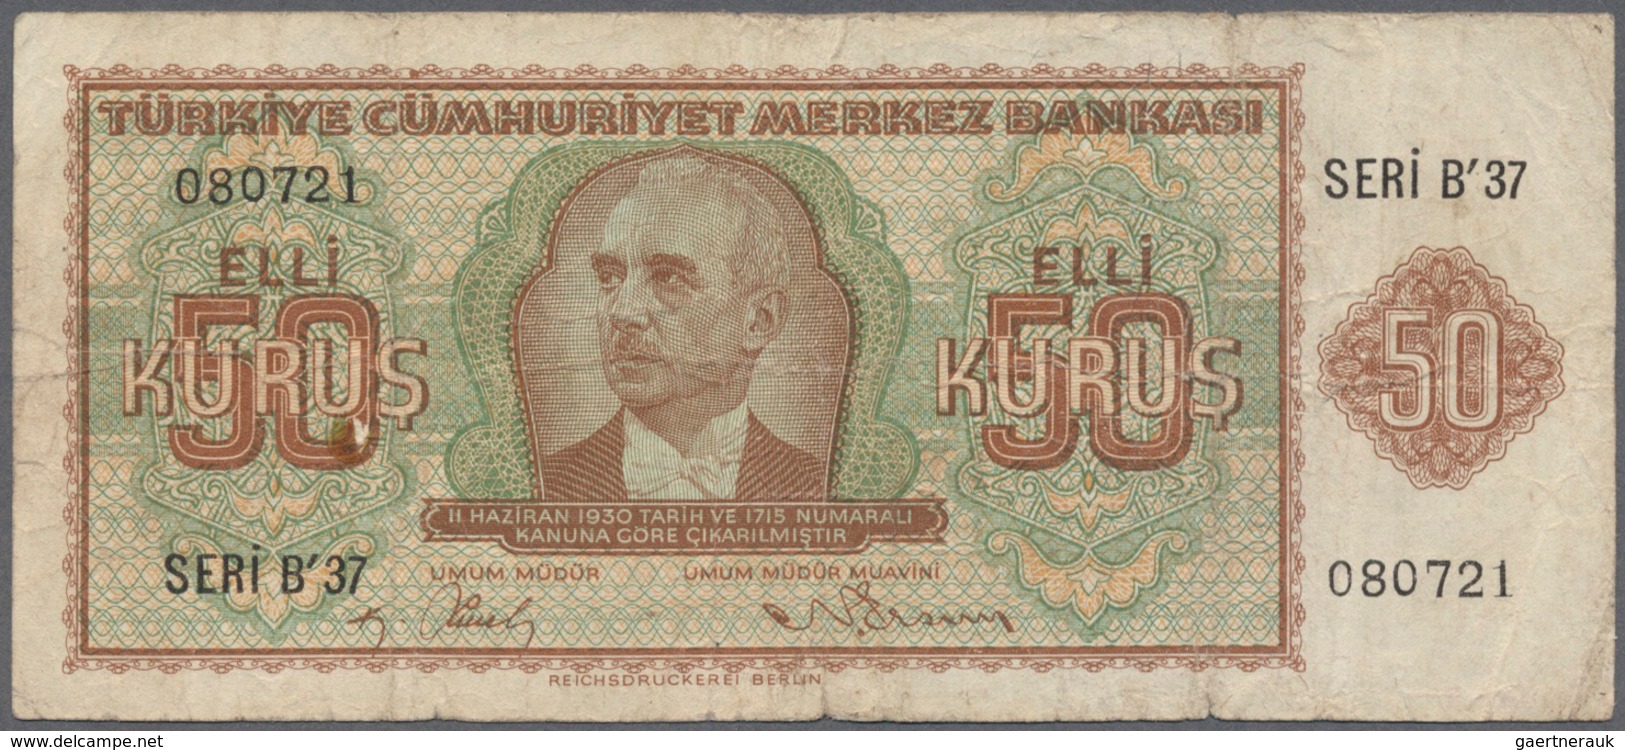 02528 Turkey / Türkei: 50 Kurus ND(1944) P. 134, Used With Several Folds And Staining In Paper, No Holes O - Turchia